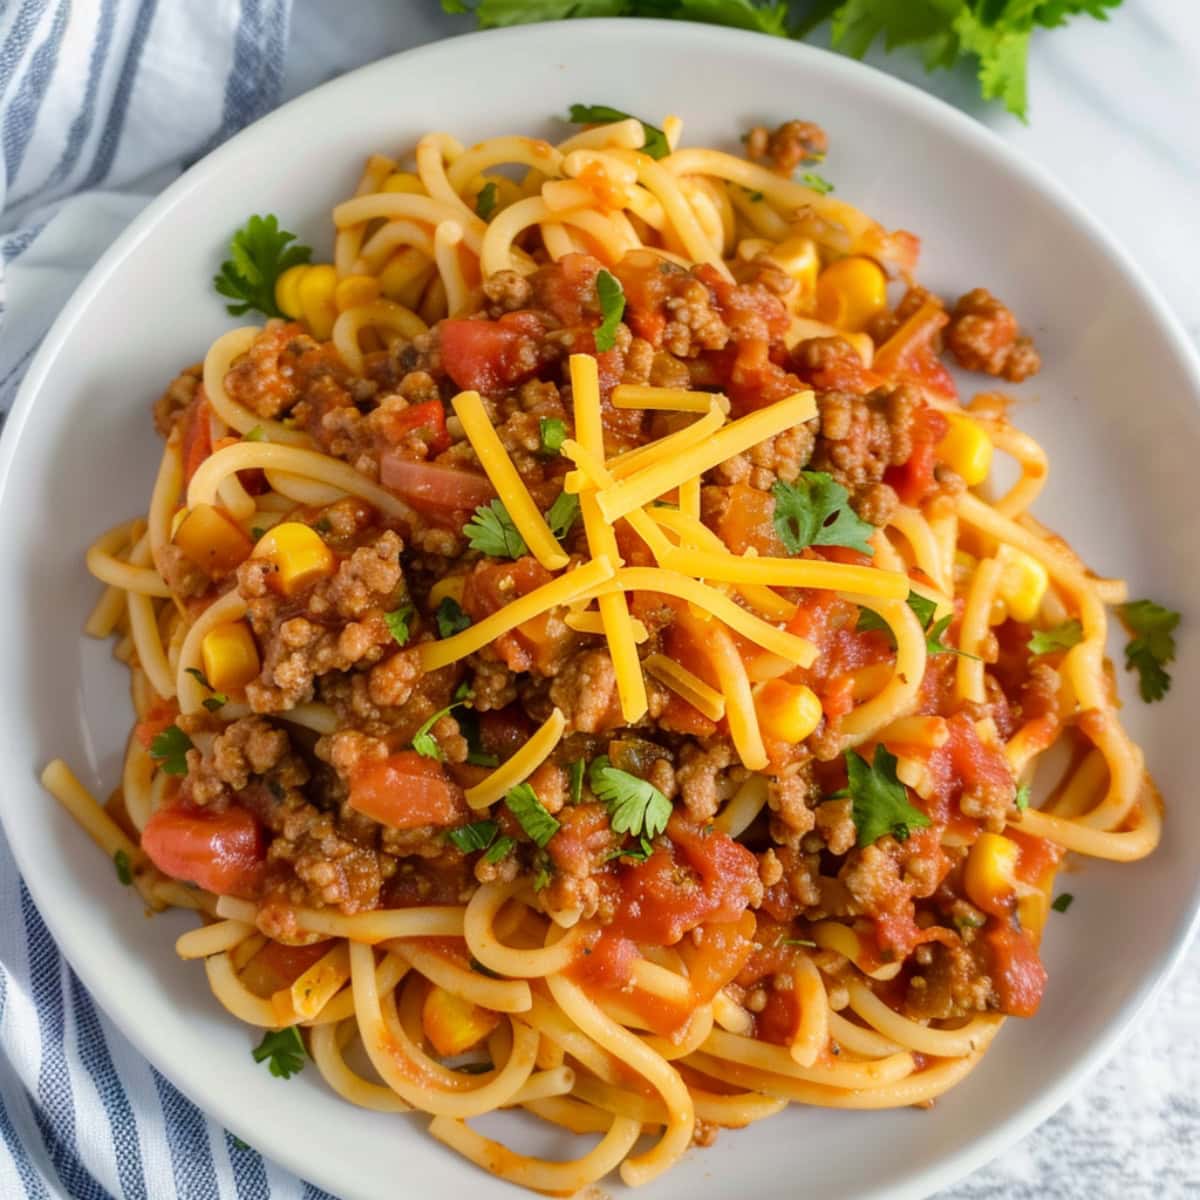 Mexican spaghetti with ground beef, topped with shredded cheese in a white plate.